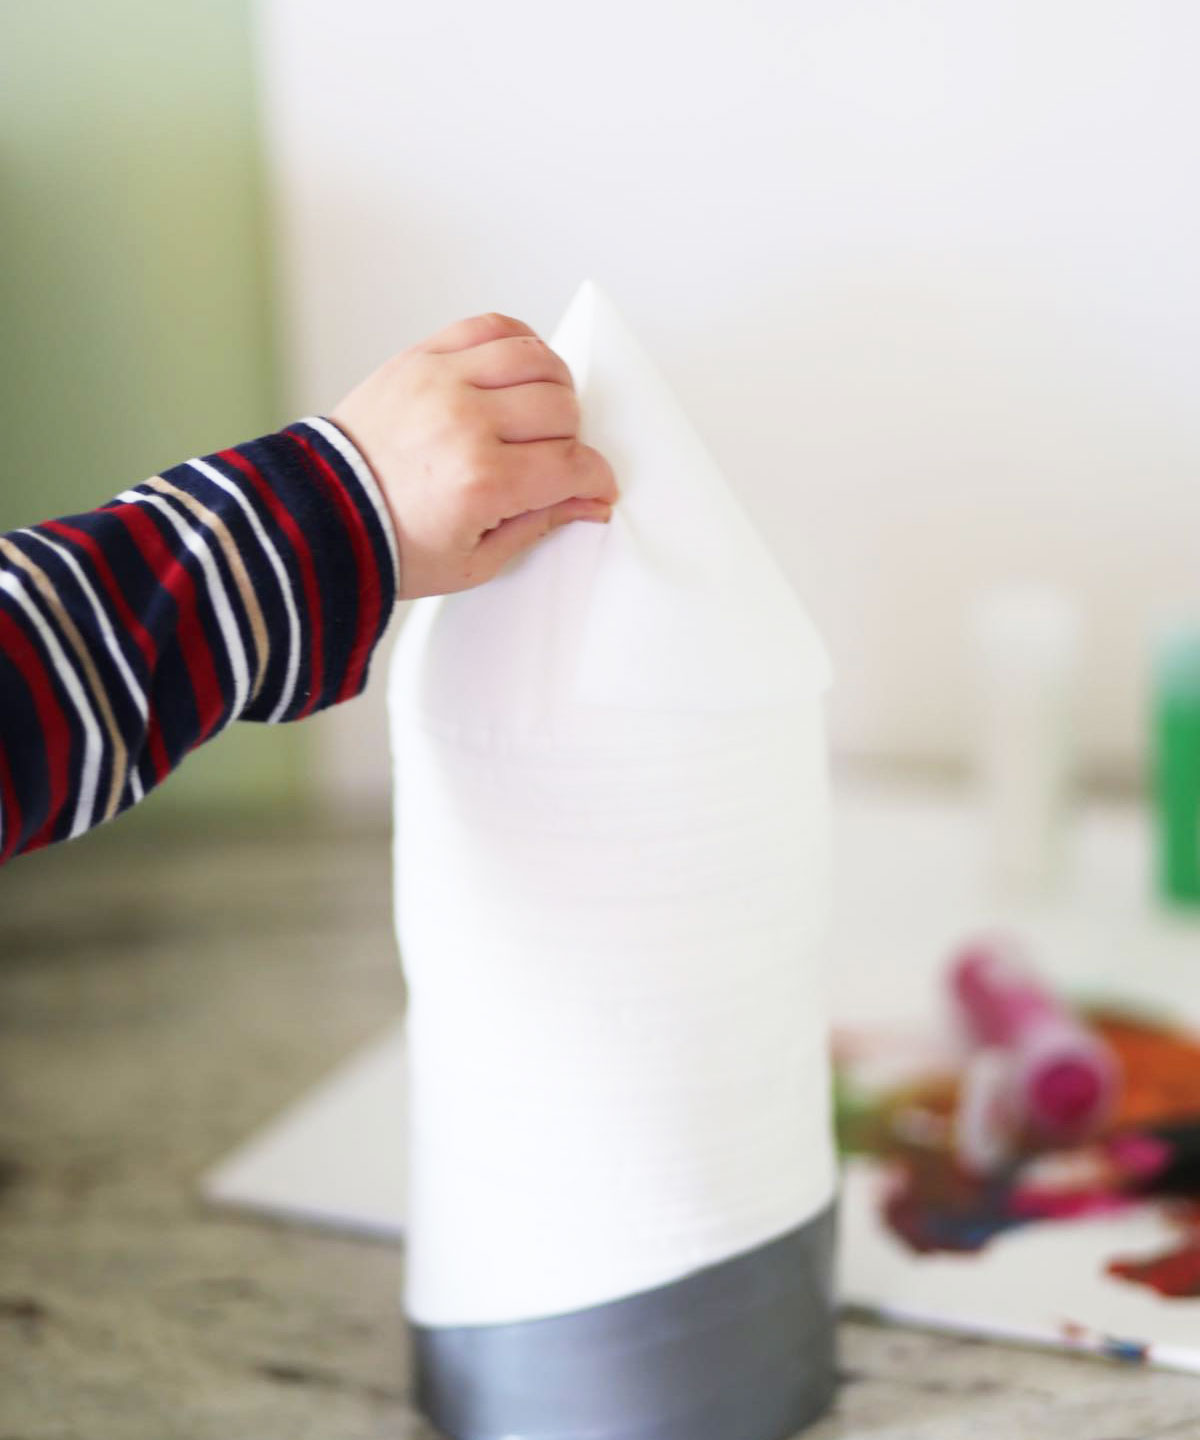 Ora is a new all-round paper towel you can grab with one hand, available now at Target.com.